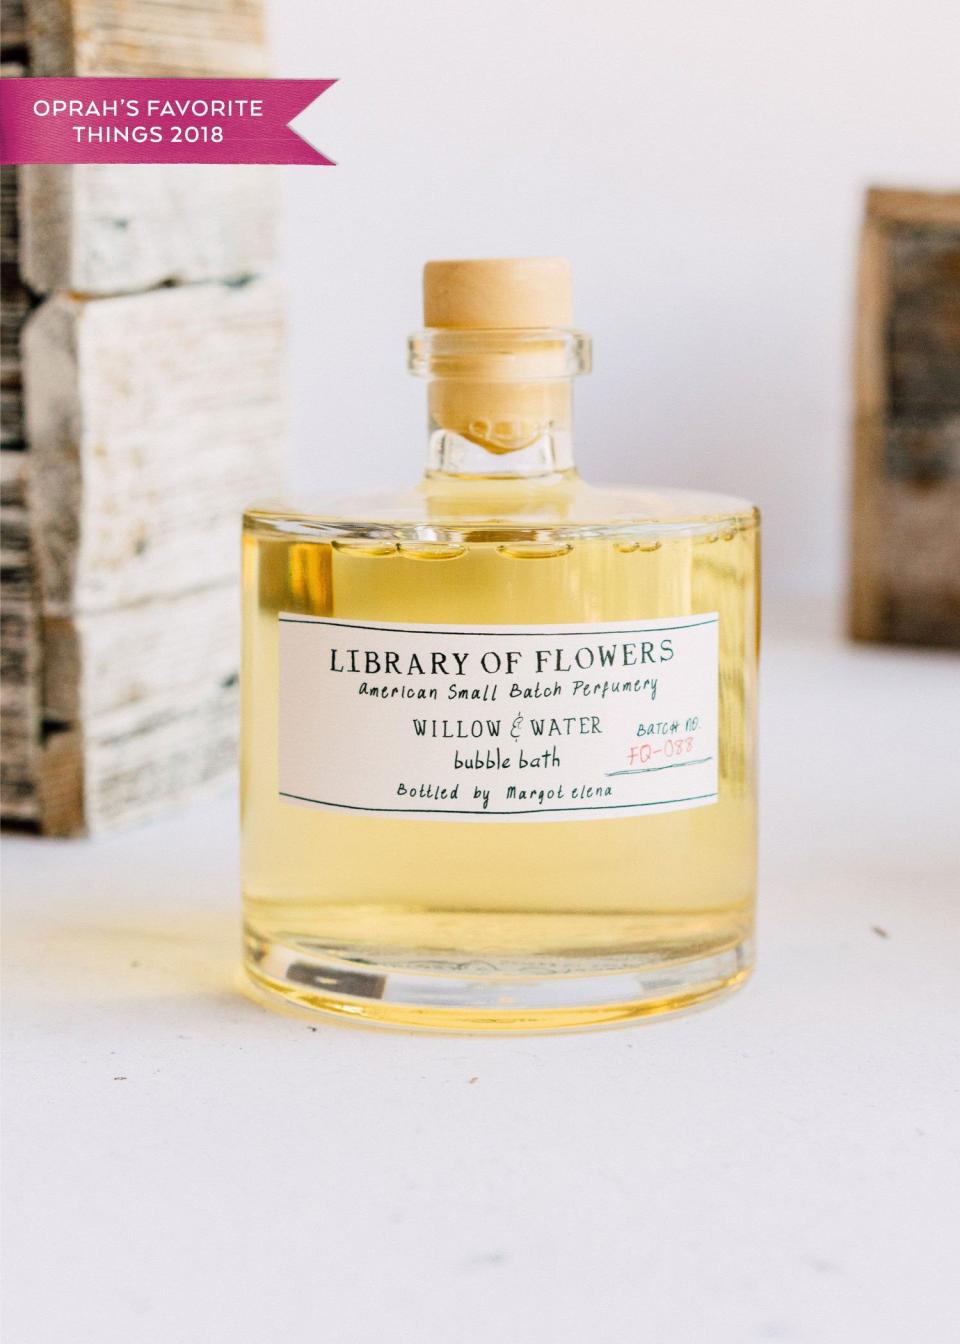 1) Library of Flowers Willow & Water Bubble Bath